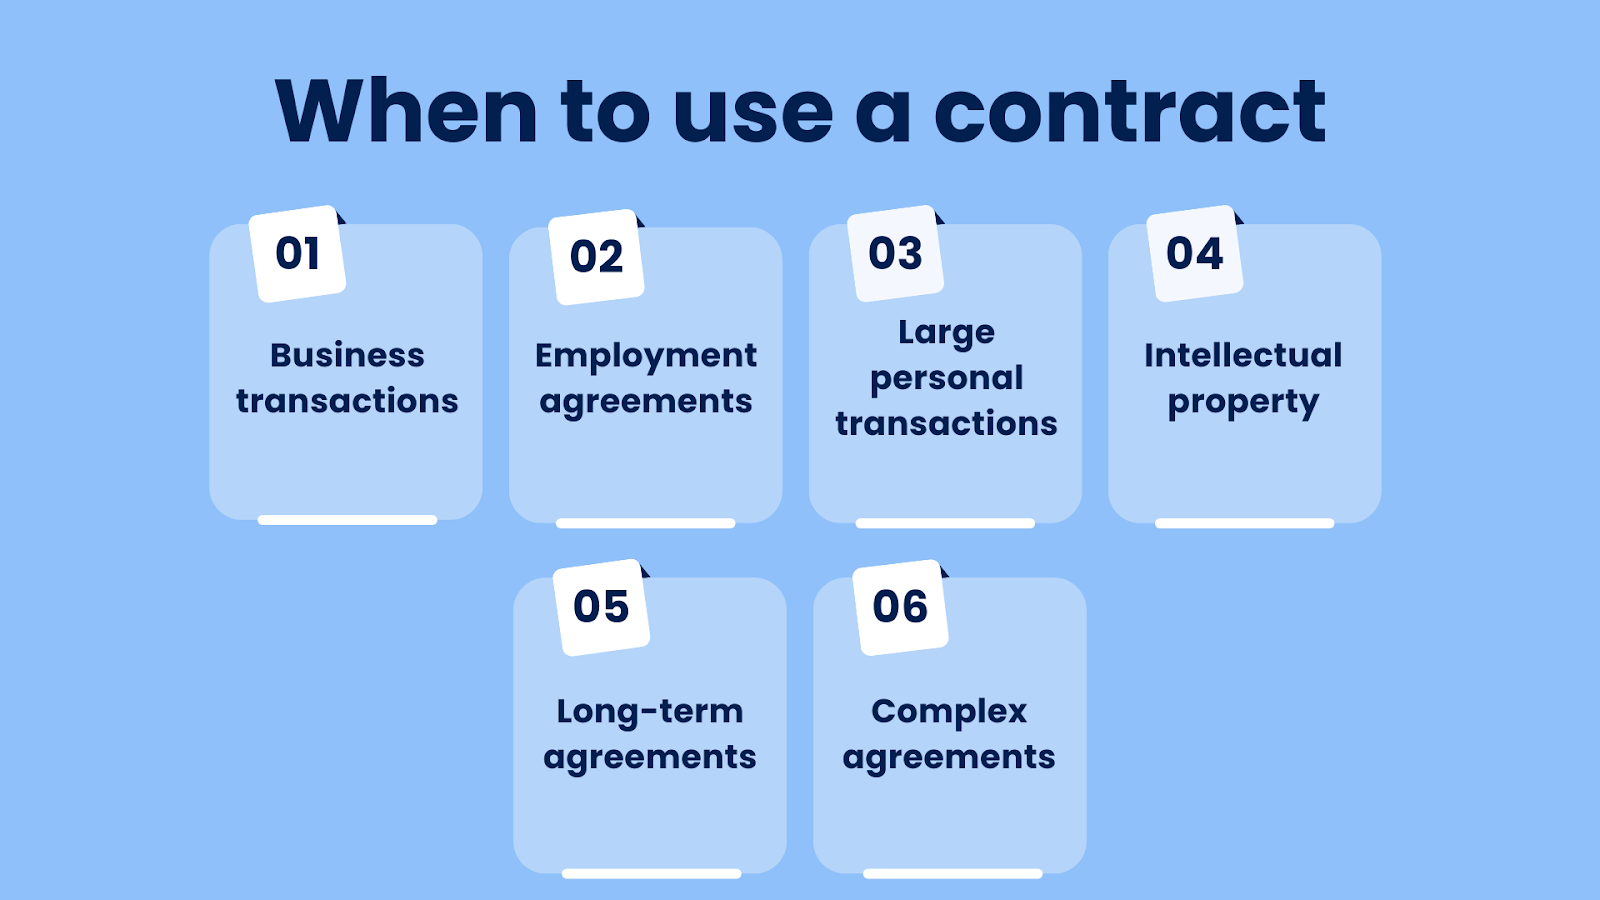 When to use a contract